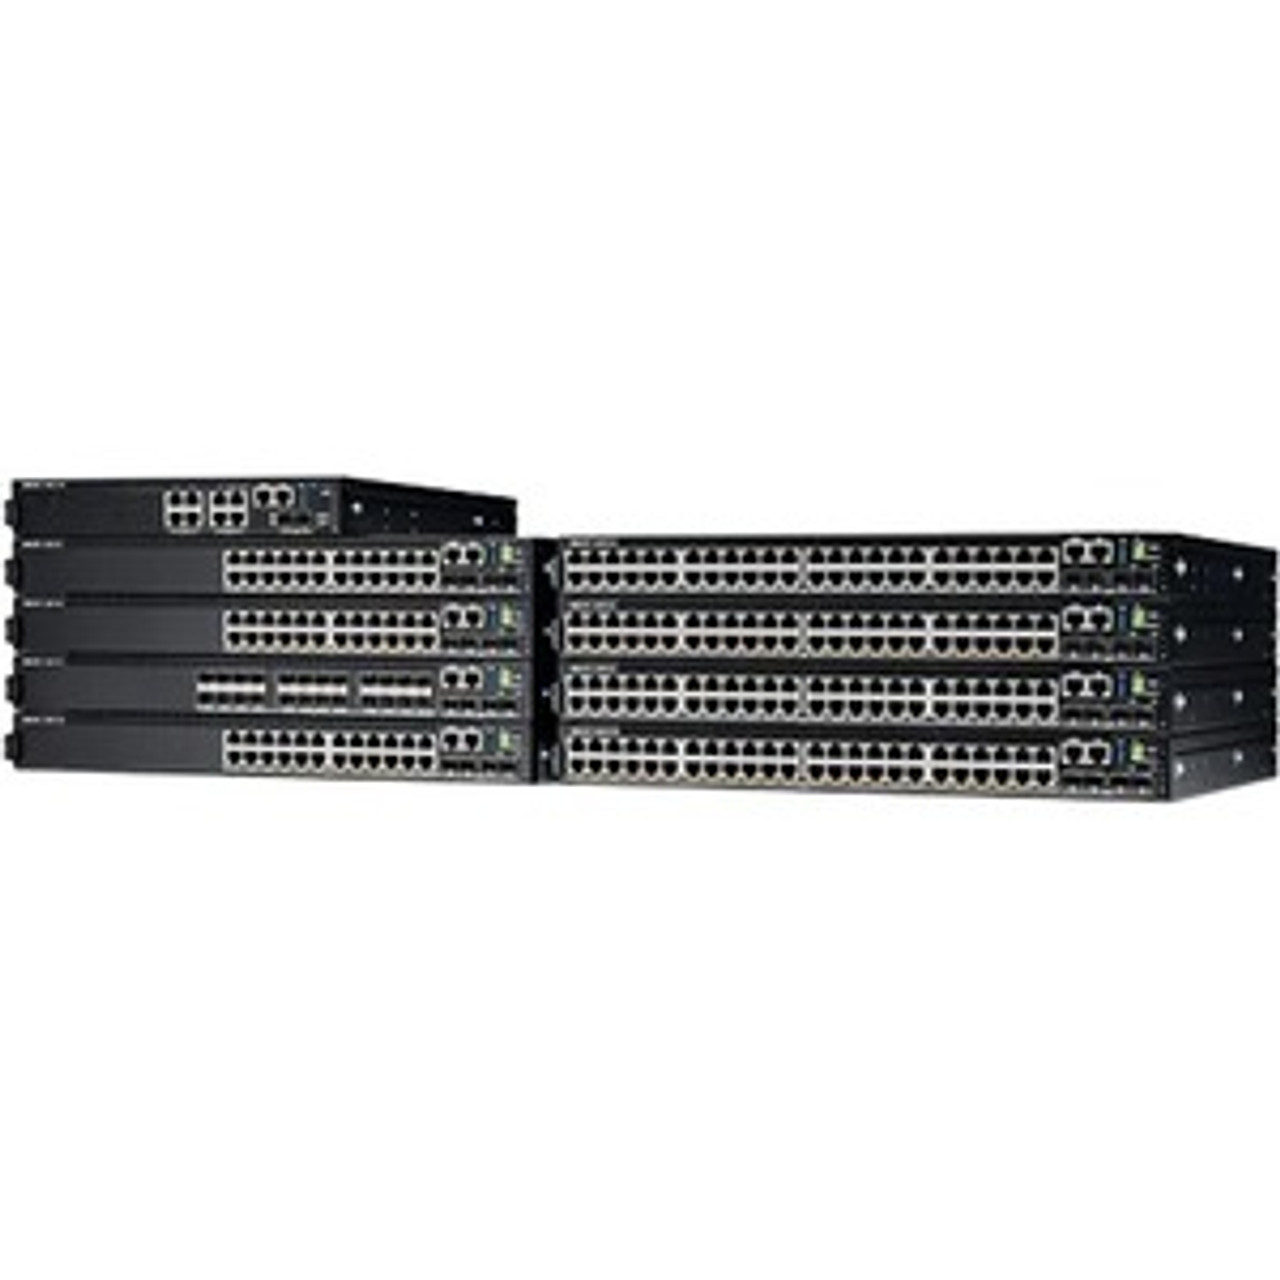 N3248TE-ONF Dell EMC PowerSwitch N3248TE-ON PS/IO OS6 - 48 Ports - Manageable - 3 Layer Supported - Modular - 212 W Power Consumption - Optical Fiber, Twisted